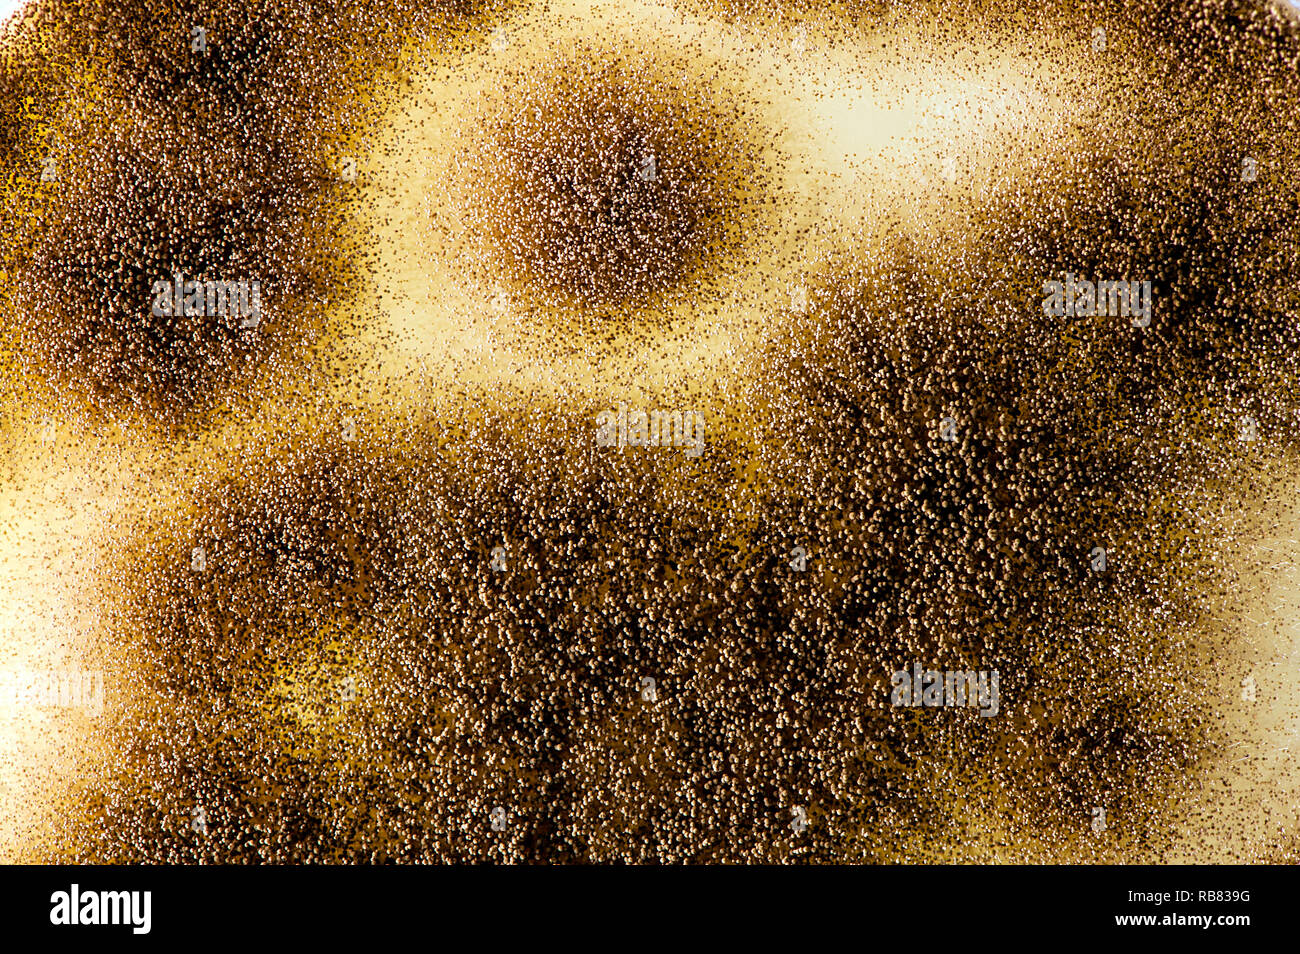 close up of surface of aspergillus nieger culture with spores Stock Photo